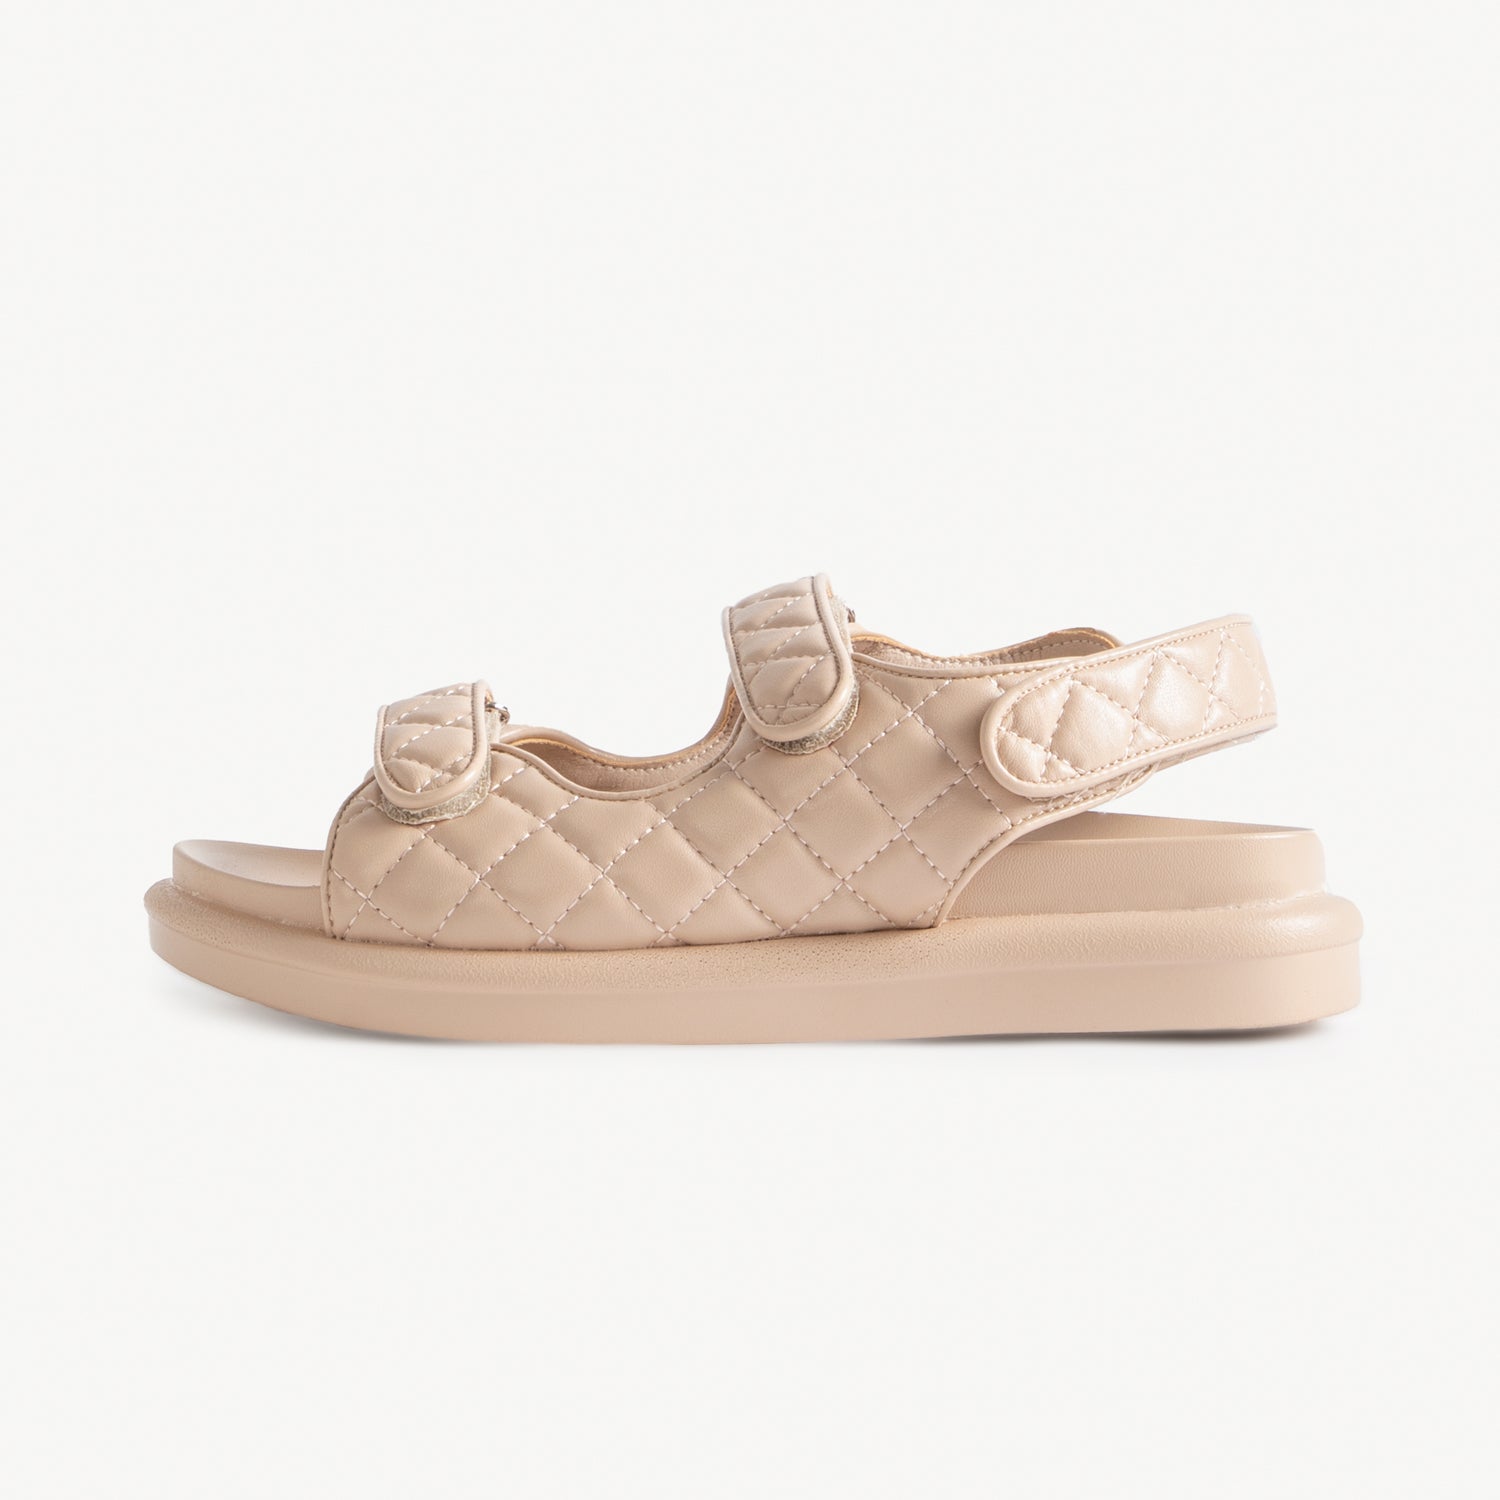 RAID Amylia Quilted Sandal in Beige